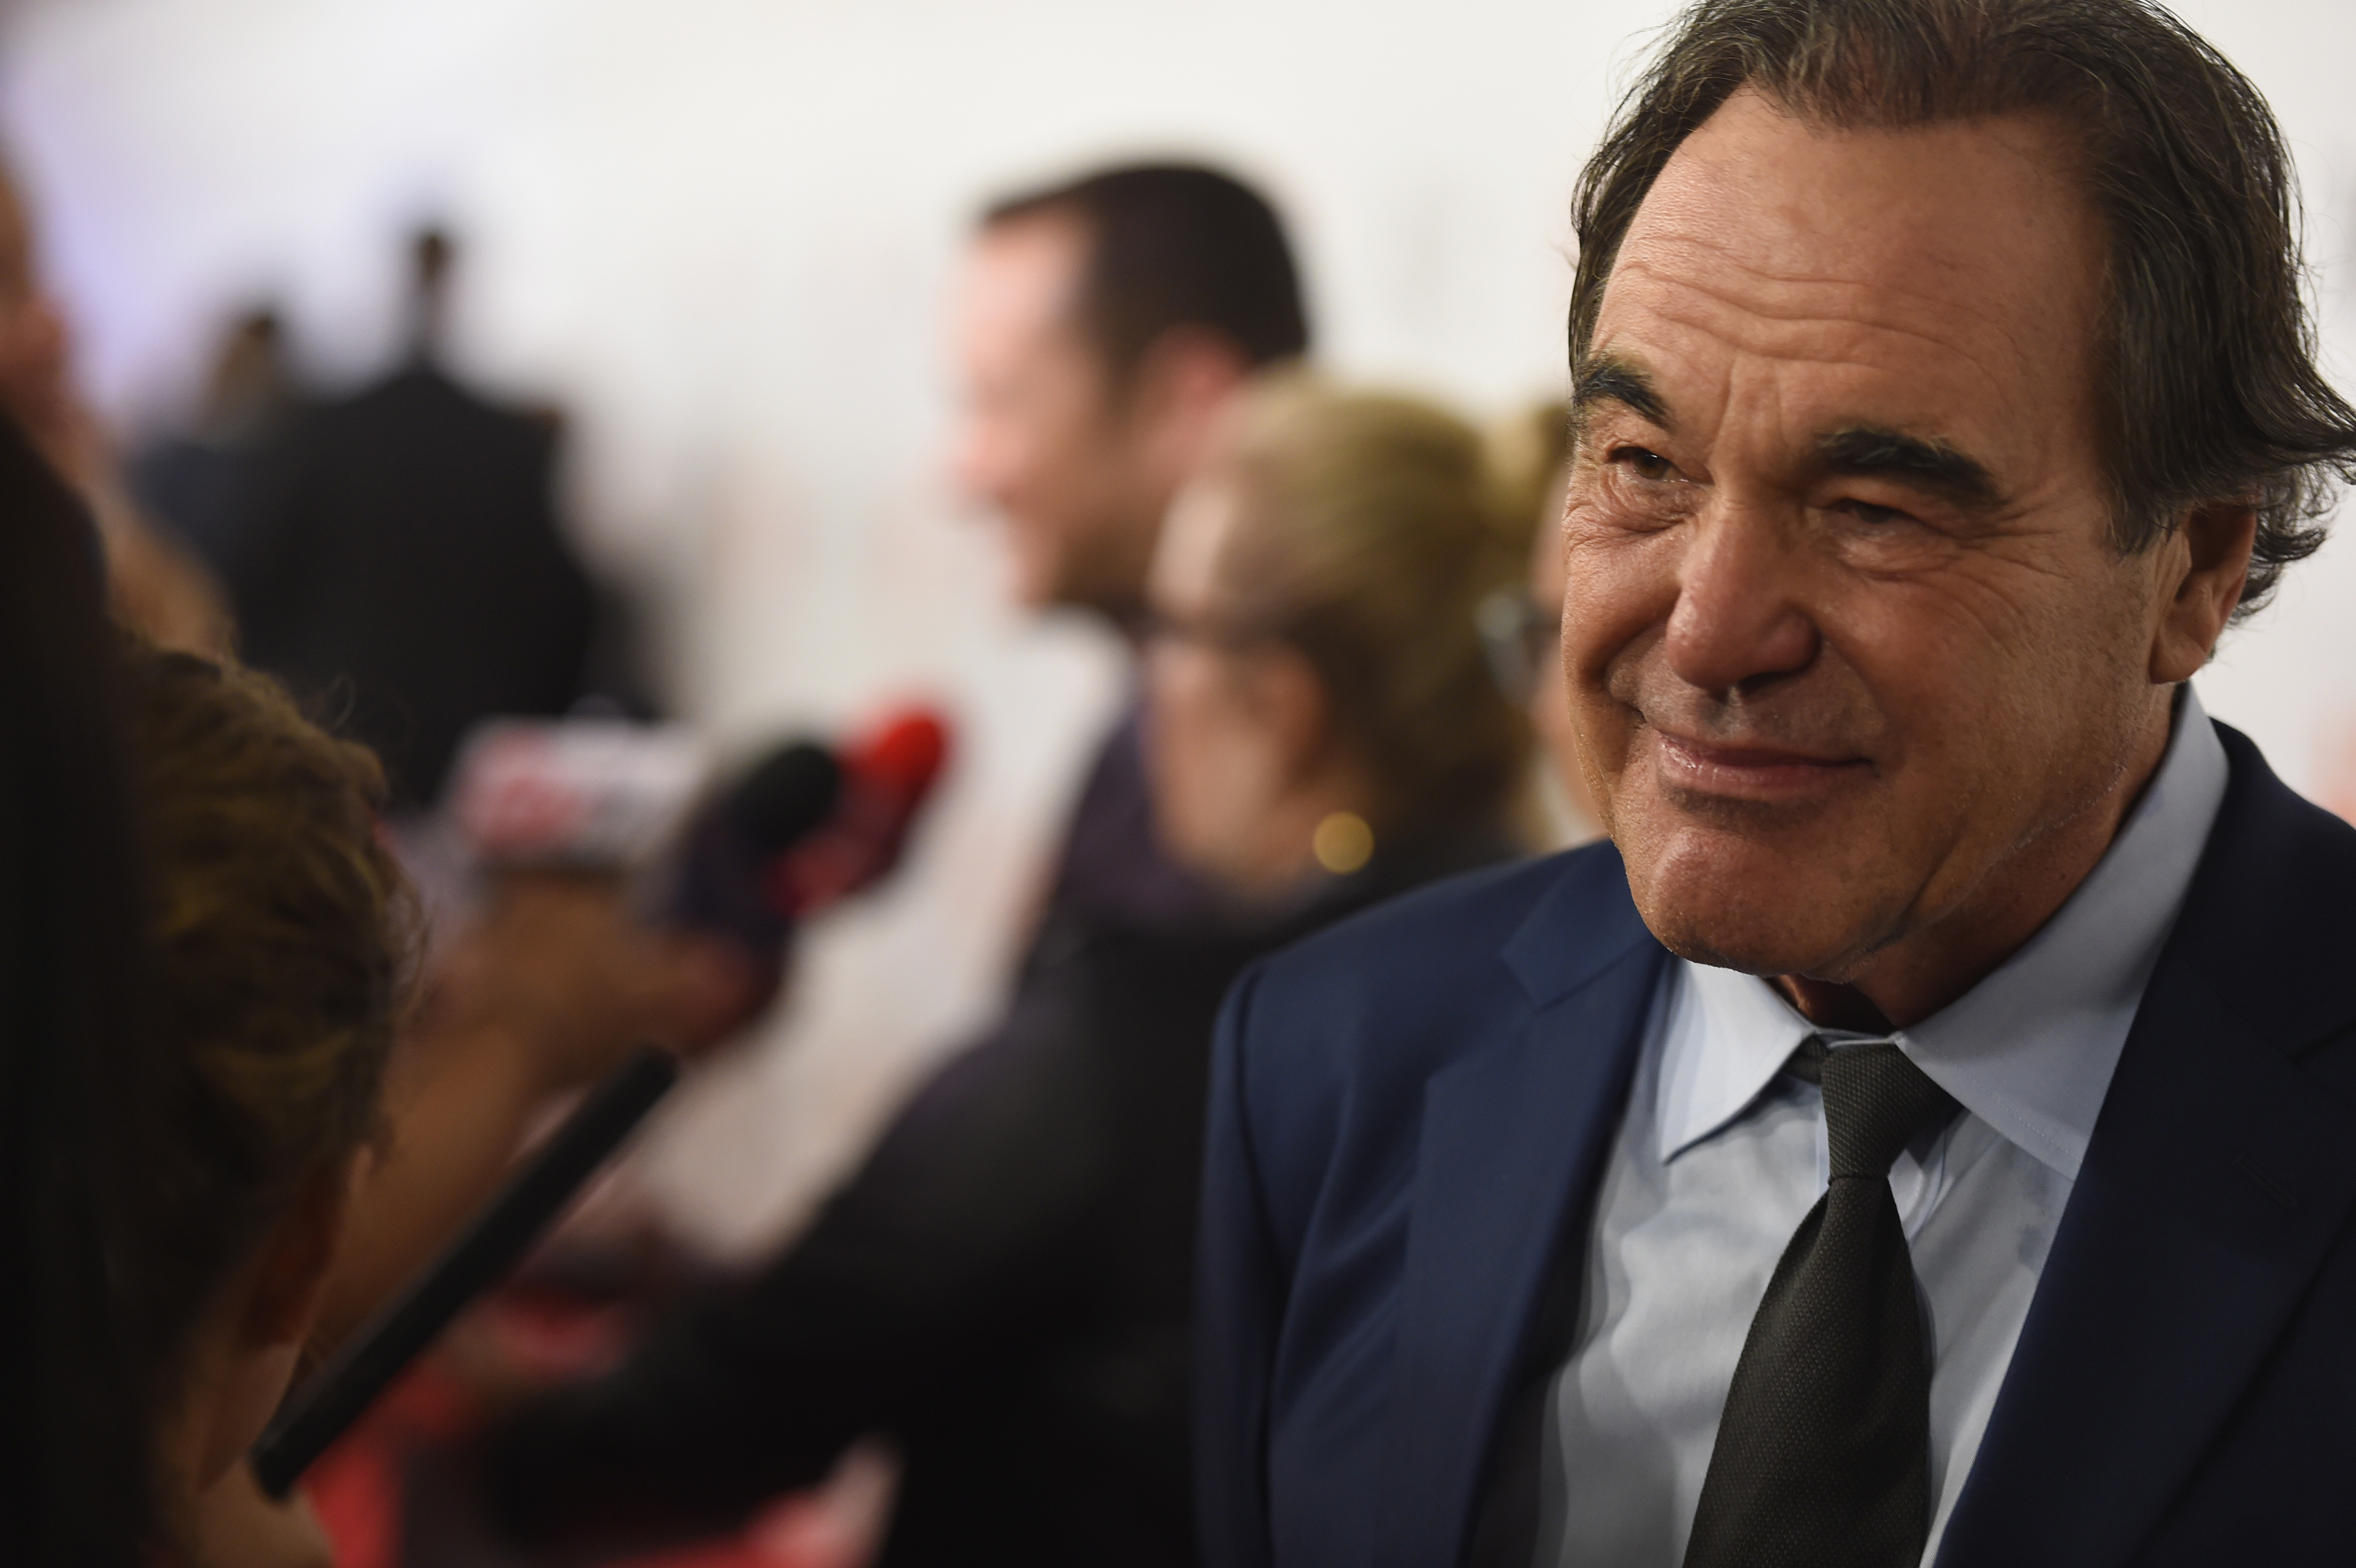 TORONTO, ON - SEPTEMBER 09:  Director Oliver Stone attends the "Snowden" premiere during the 2016 Toronto International Film Festival at Roy Thomson Hall on September 9, 2016 in Toronto, Canada.  (Photo by Kevin Winter/Getty Images)